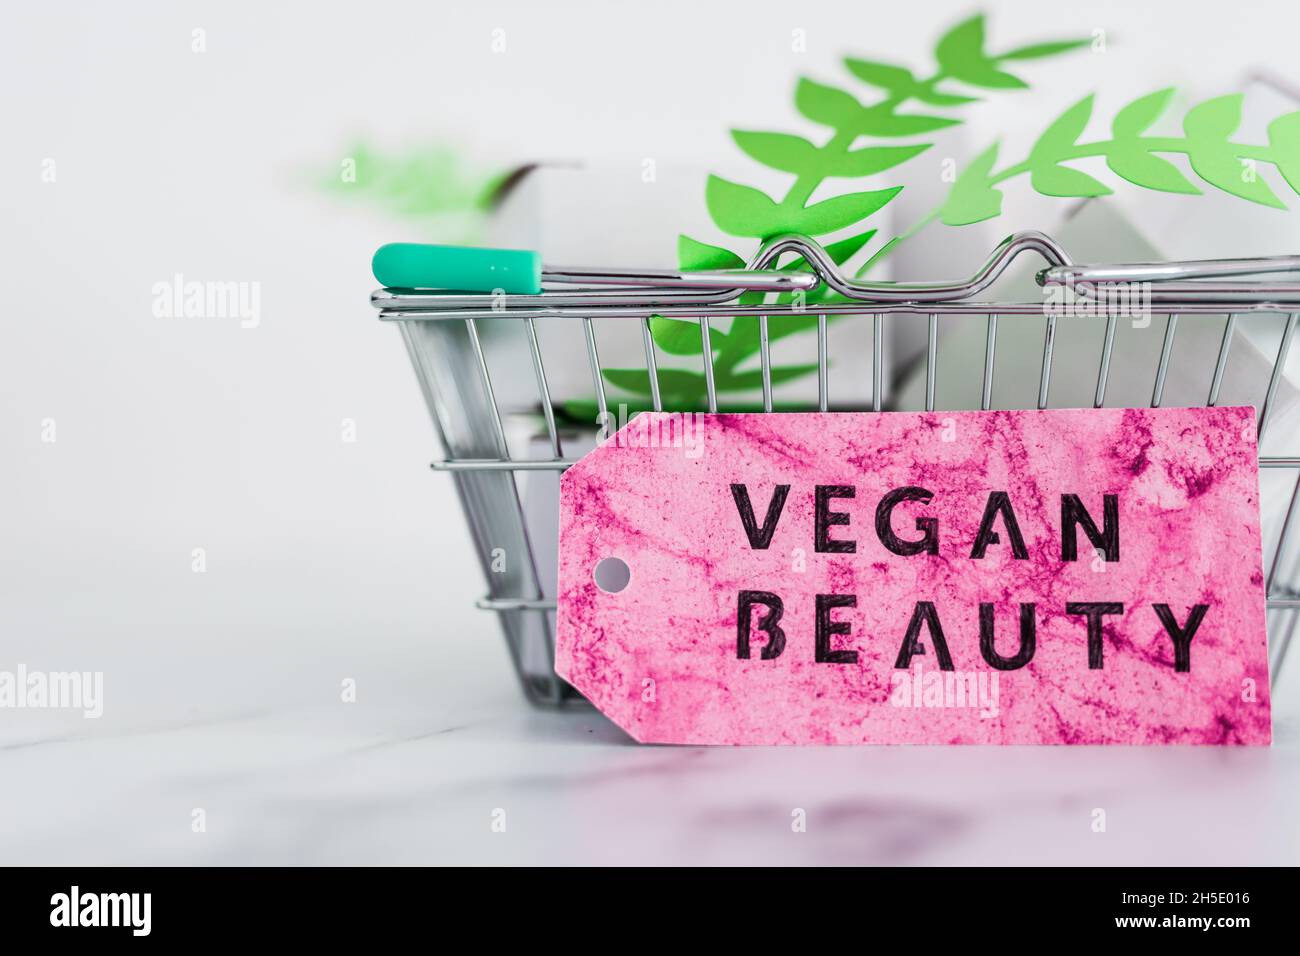 cosmetics and cruelty free product concept, shopping basket with blank product packagings and green leaves with Vegan Beauty label on them Stock Photo